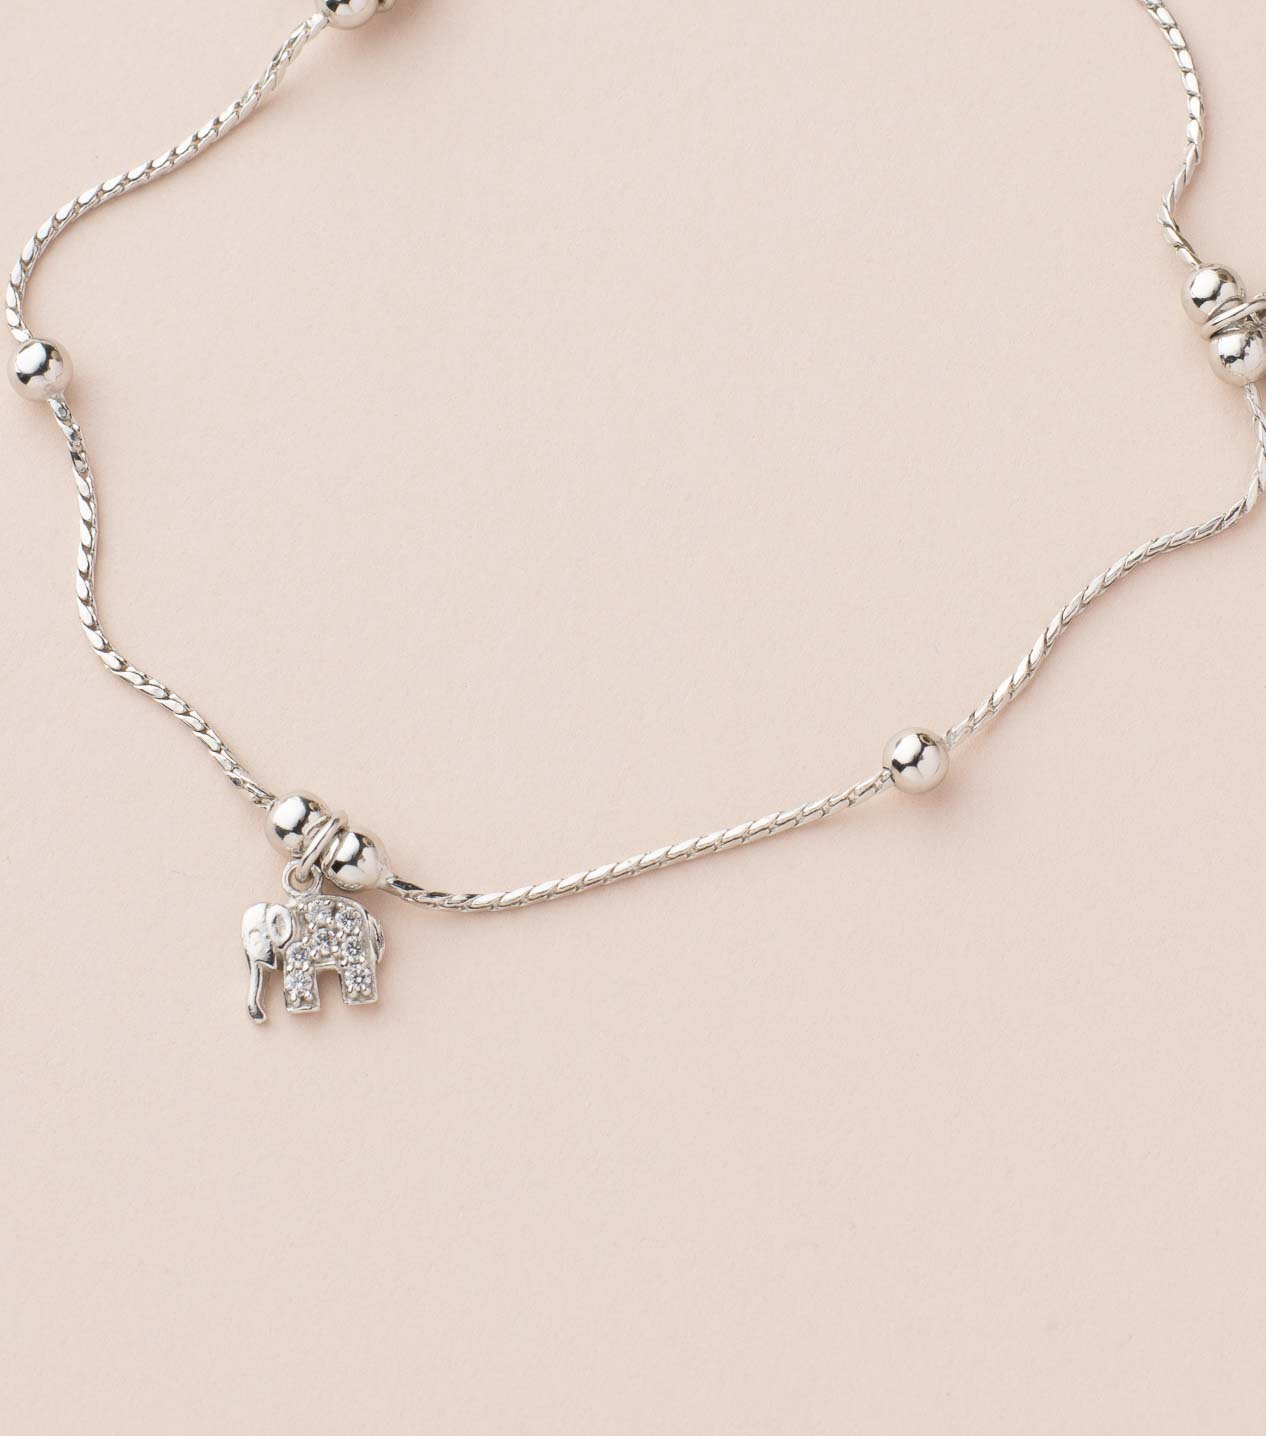 Silver Fashionable Anklet